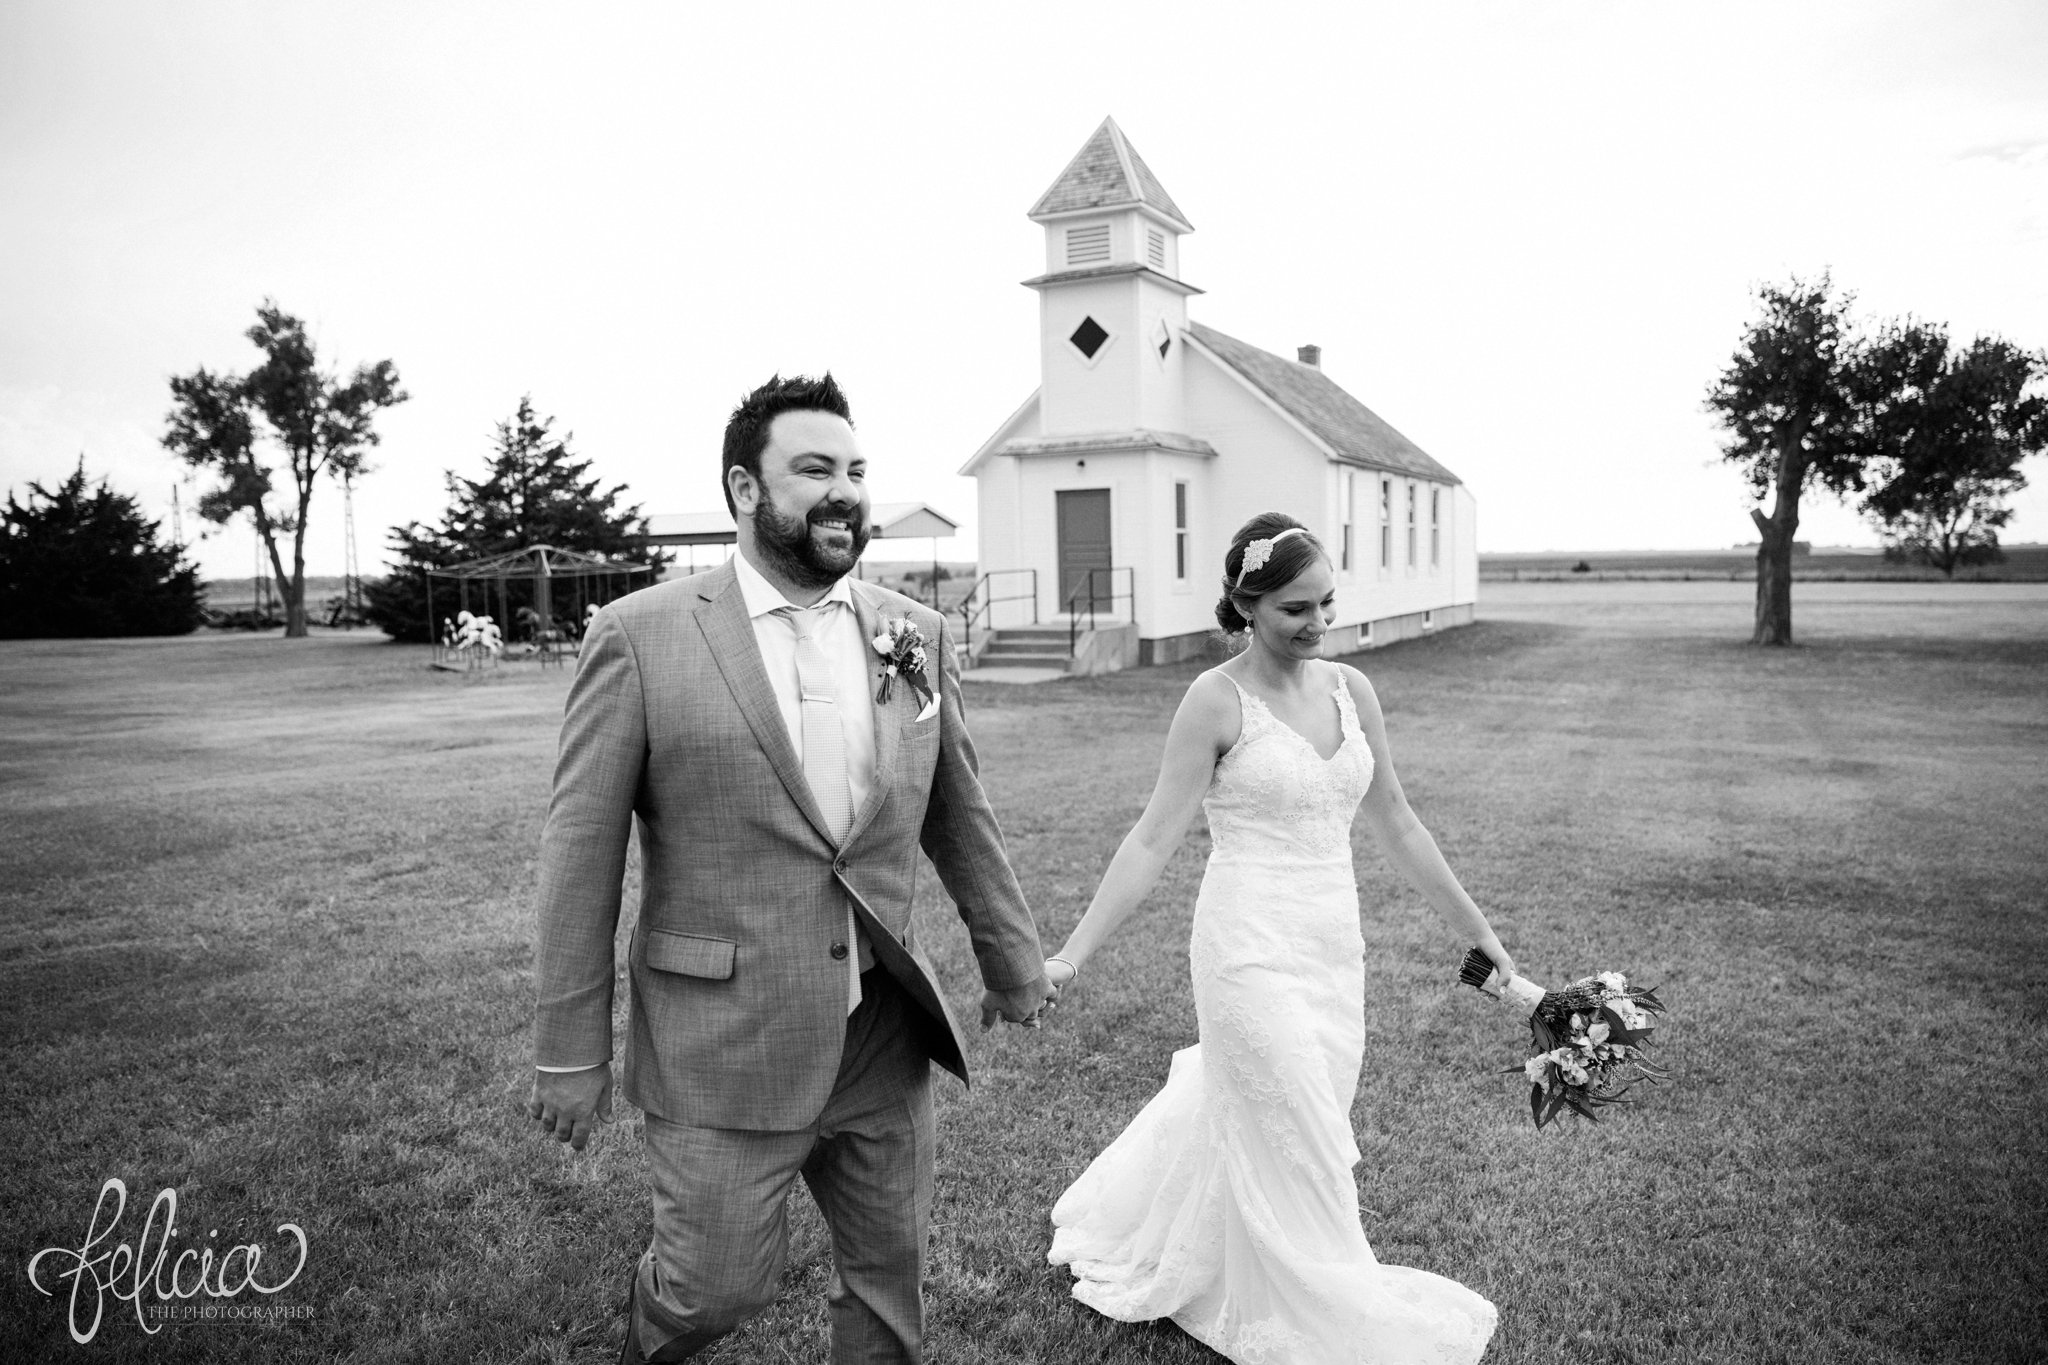 Black and White | Wedding | Wedding Photography | Wedding Photos | Travel Photographer | Images by feliciathephotographer.com | Kansas | Bride and Groom Portrait | Walking | Candid | Holding Hands | Chapel 